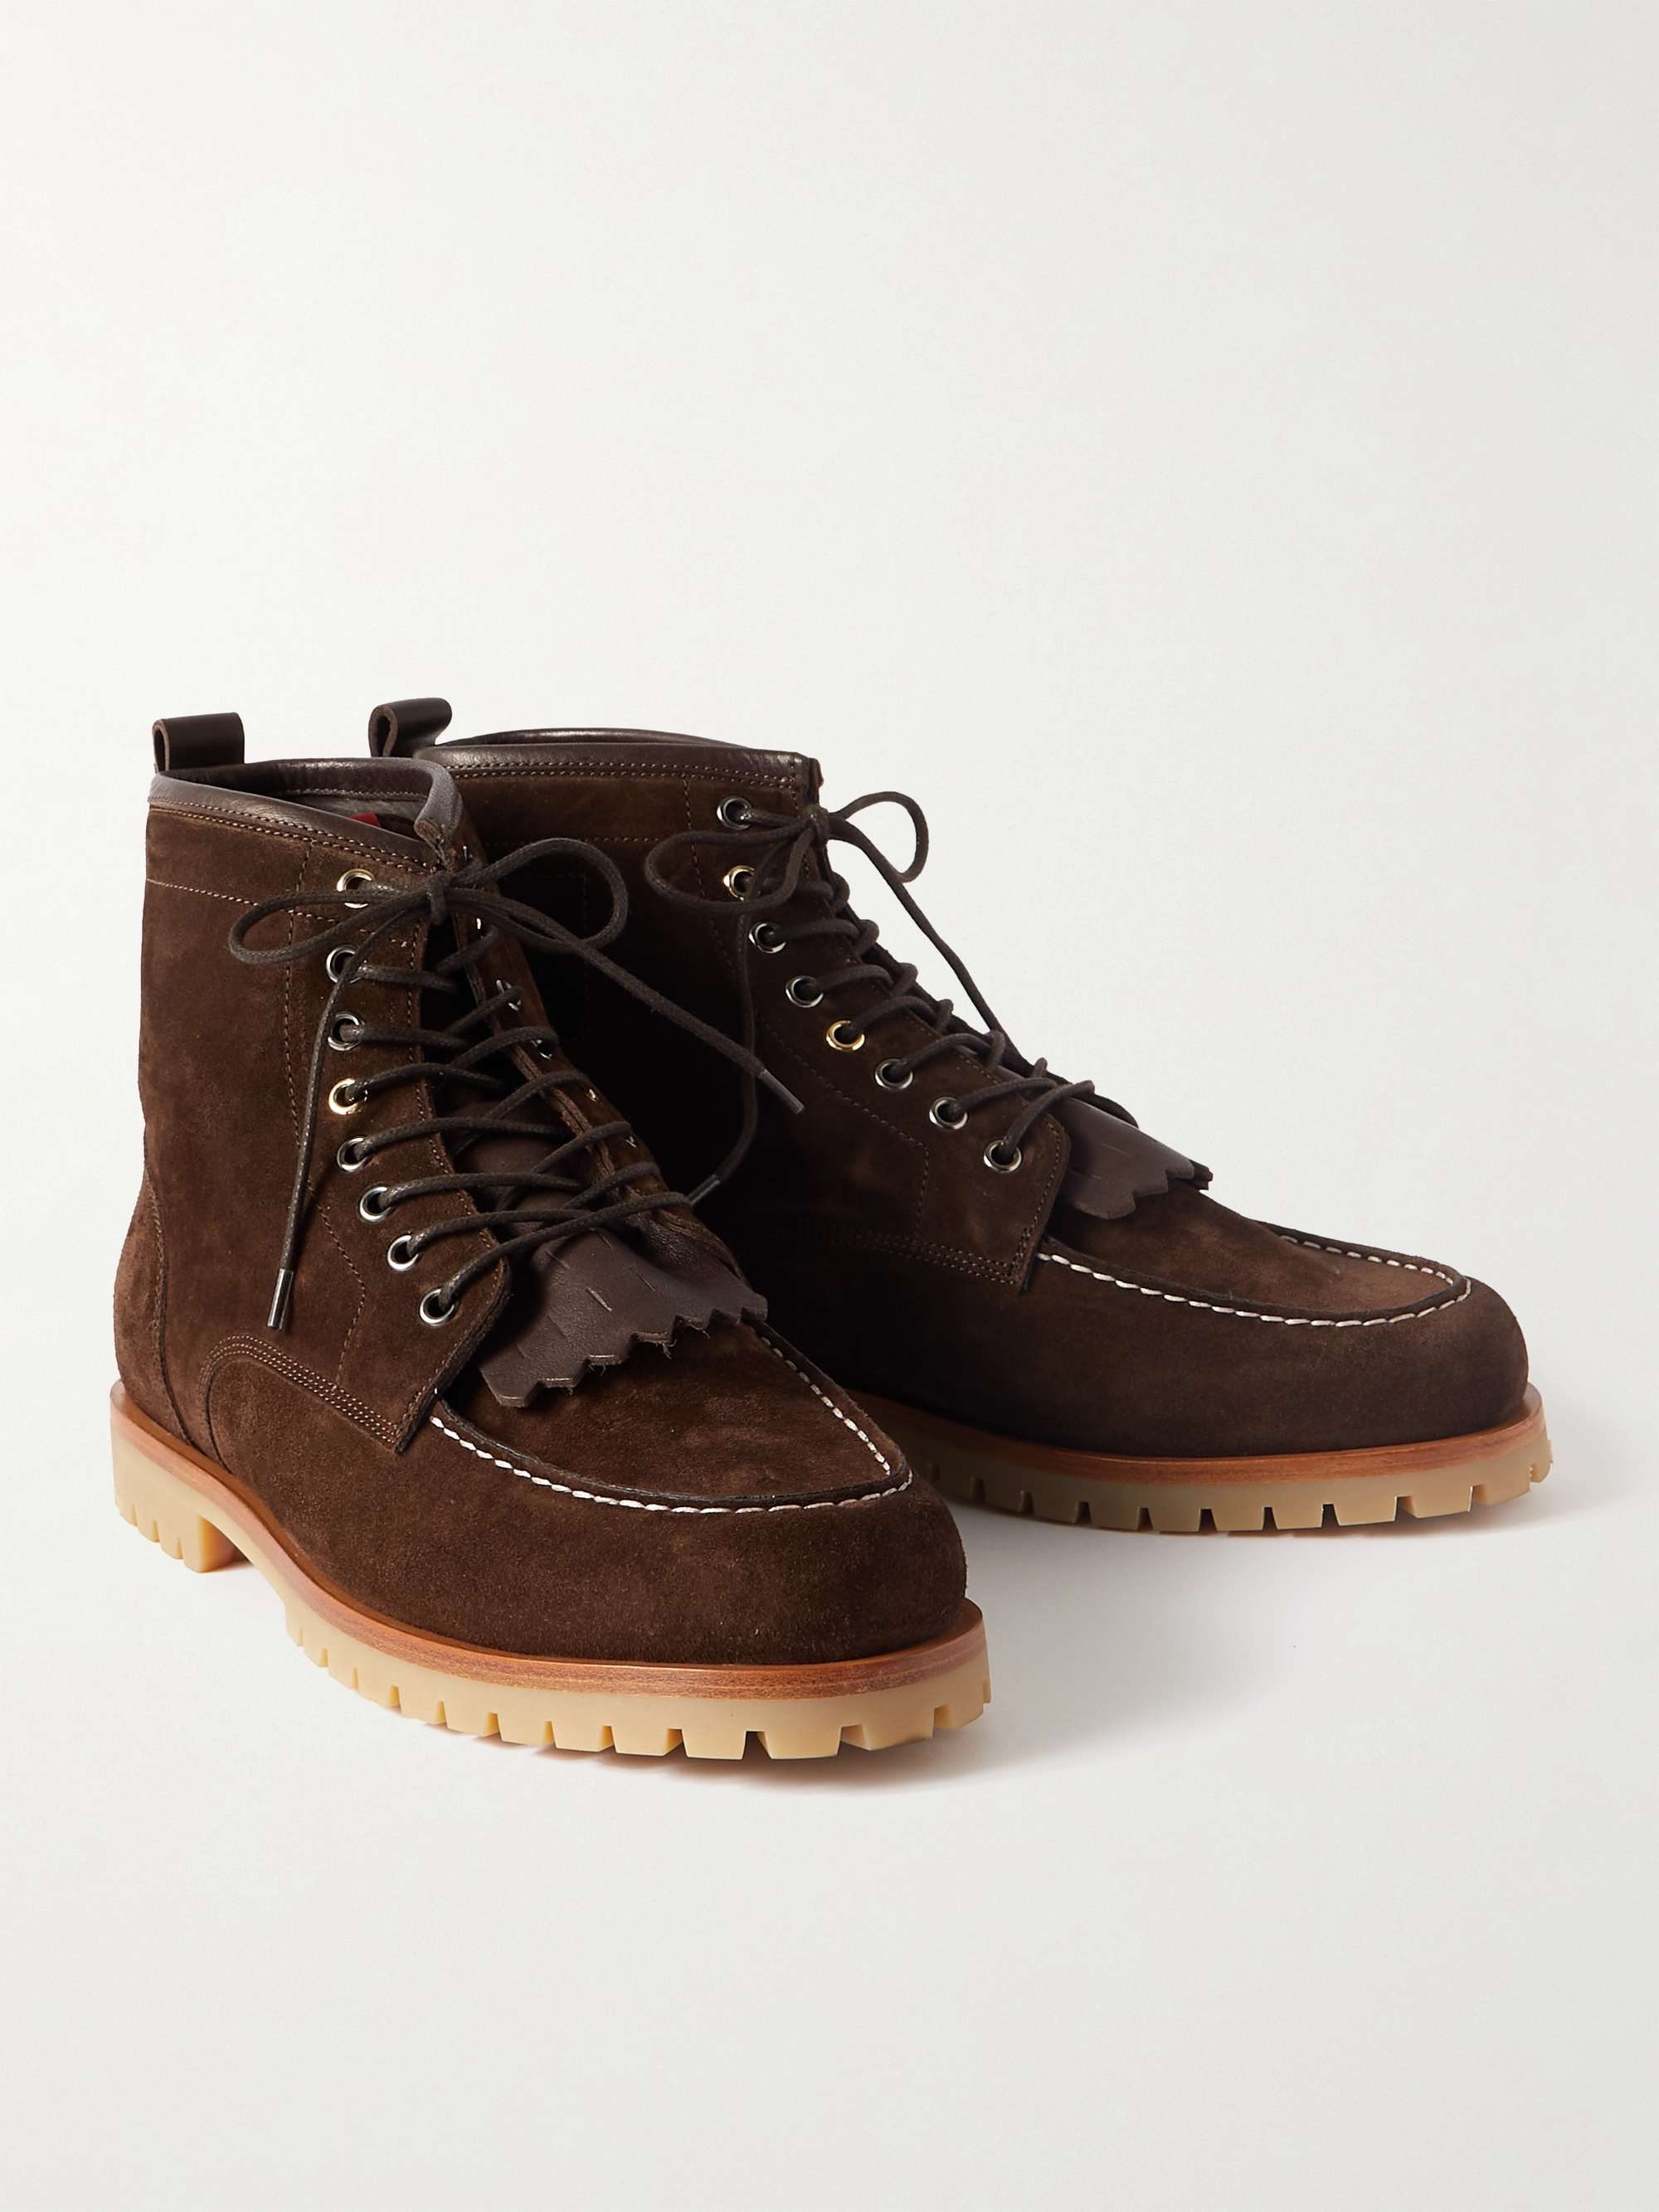 PAUL SMITH Jarmush Leather-Trimmed Suede Boots for Men | MR PORTER